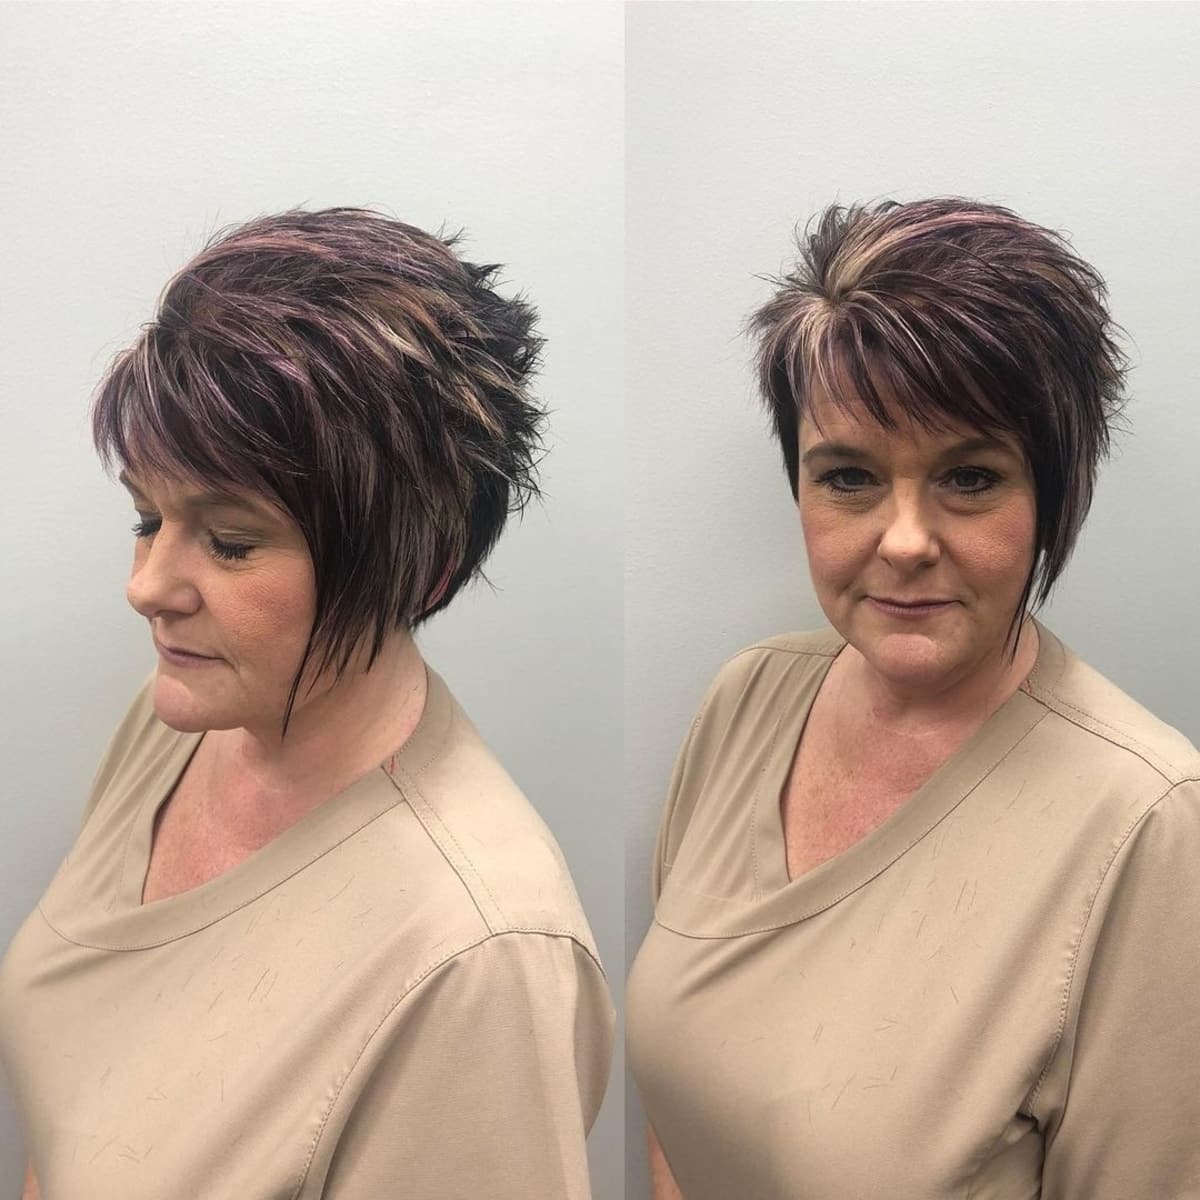 Asymmetrical Short, Sassy and Stacked Cut for women in their 60s